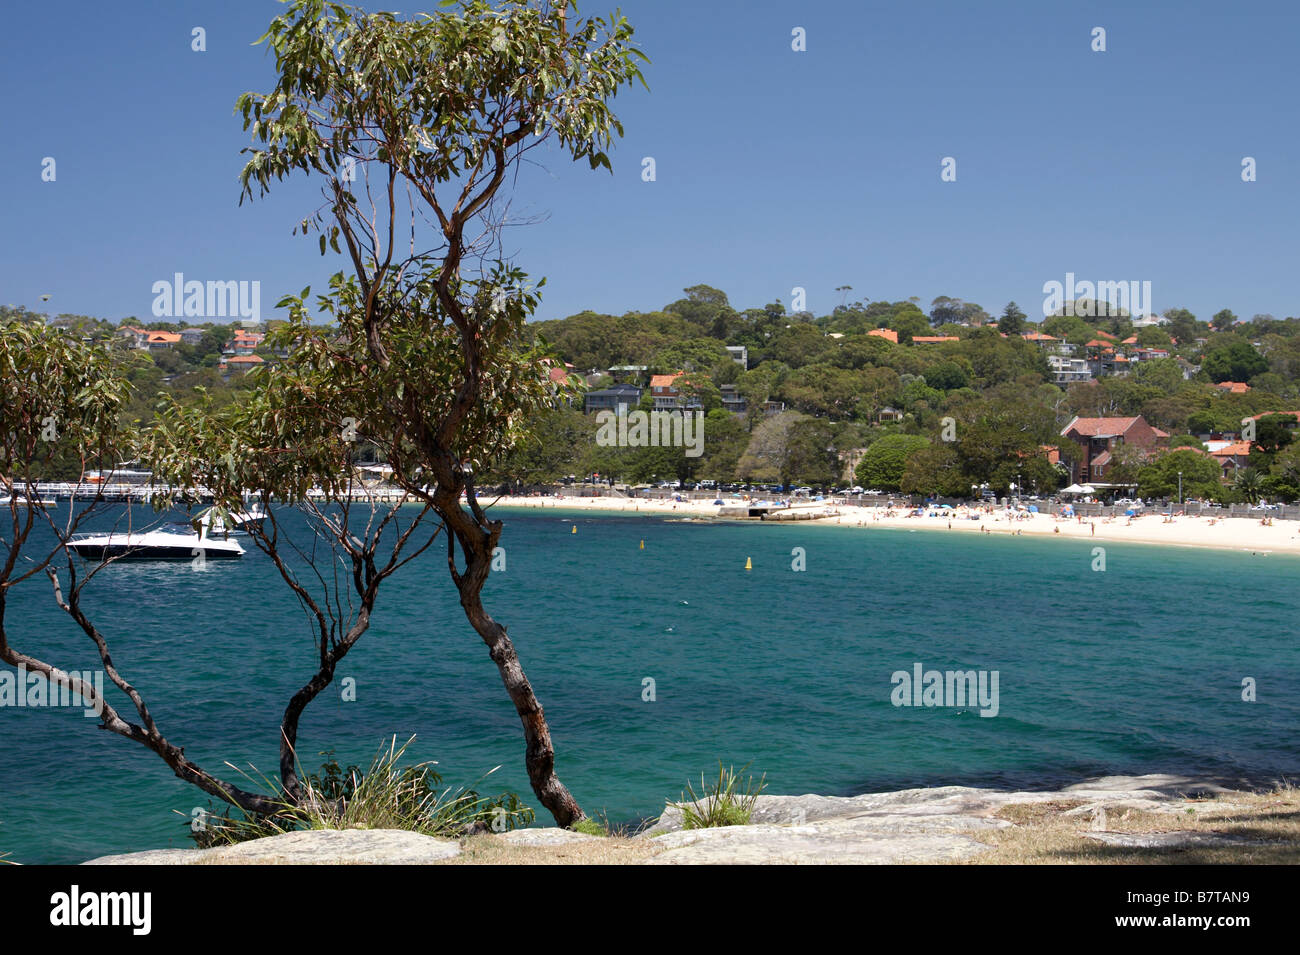 Sunbathers and swimmers at Balmoral Beach in North Sydney Stock Photo